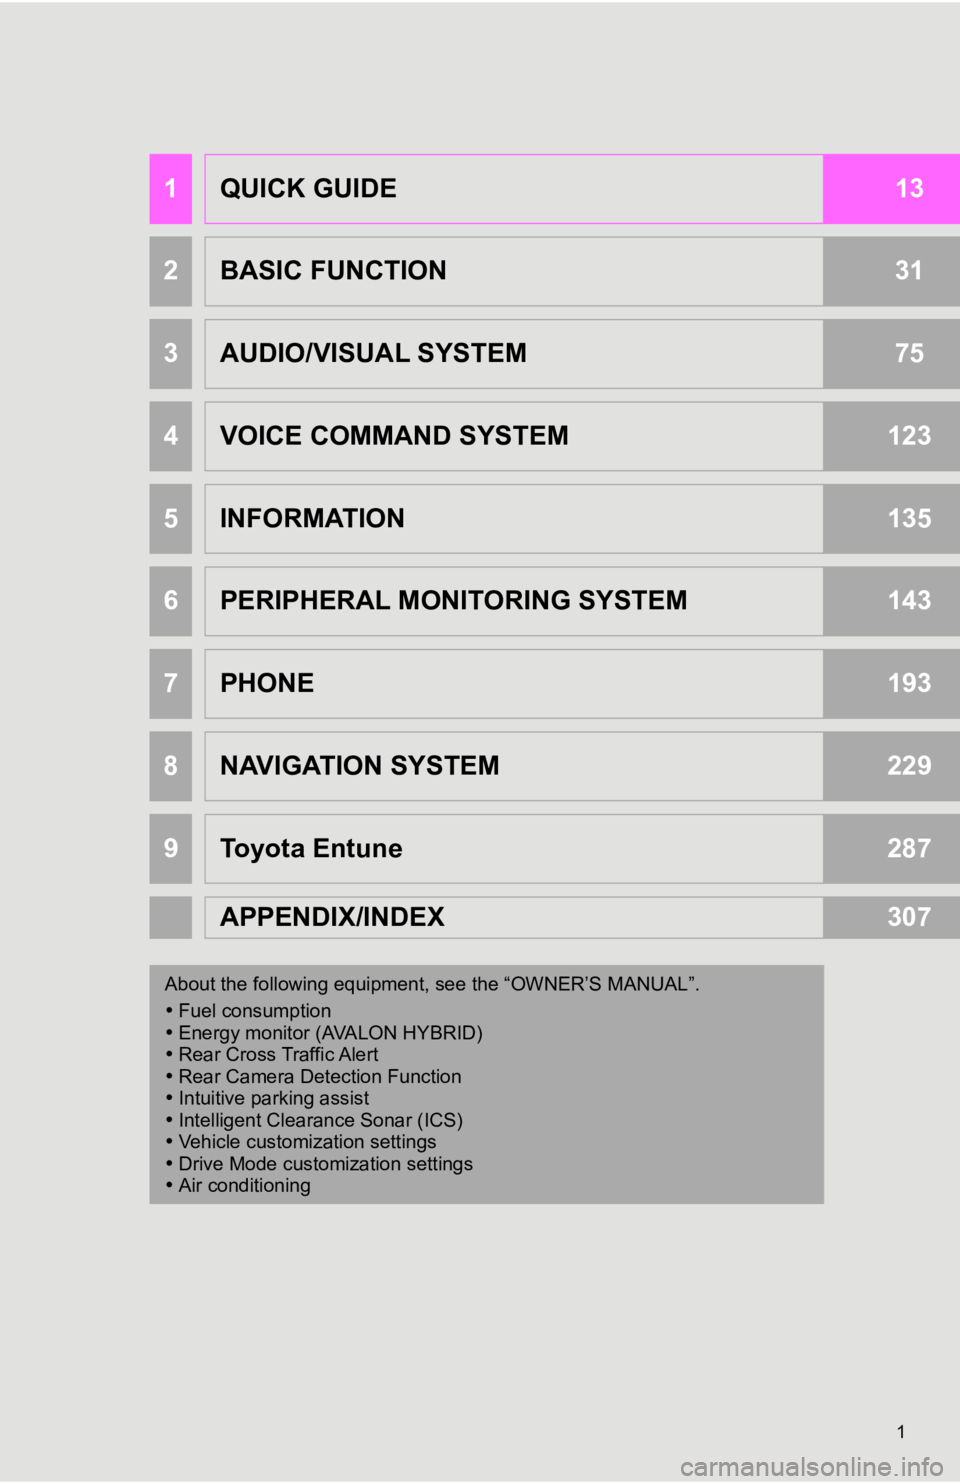 TOYOTA AVALON 2020  Accessories, Audio & Navigation (in English) 1
1QUICK GUIDE13
2BASIC FUNCTION31
3AUDIO/VISUAL SYSTEM75
4VOICE COMMAND SYSTEM123
5INFORMATION135
6PERIPHERAL MONITORING SYSTEM143
7PHONE193
8NAVIGATION SYSTEM229
9Toyota Entune287
APPENDIX/INDEX307
